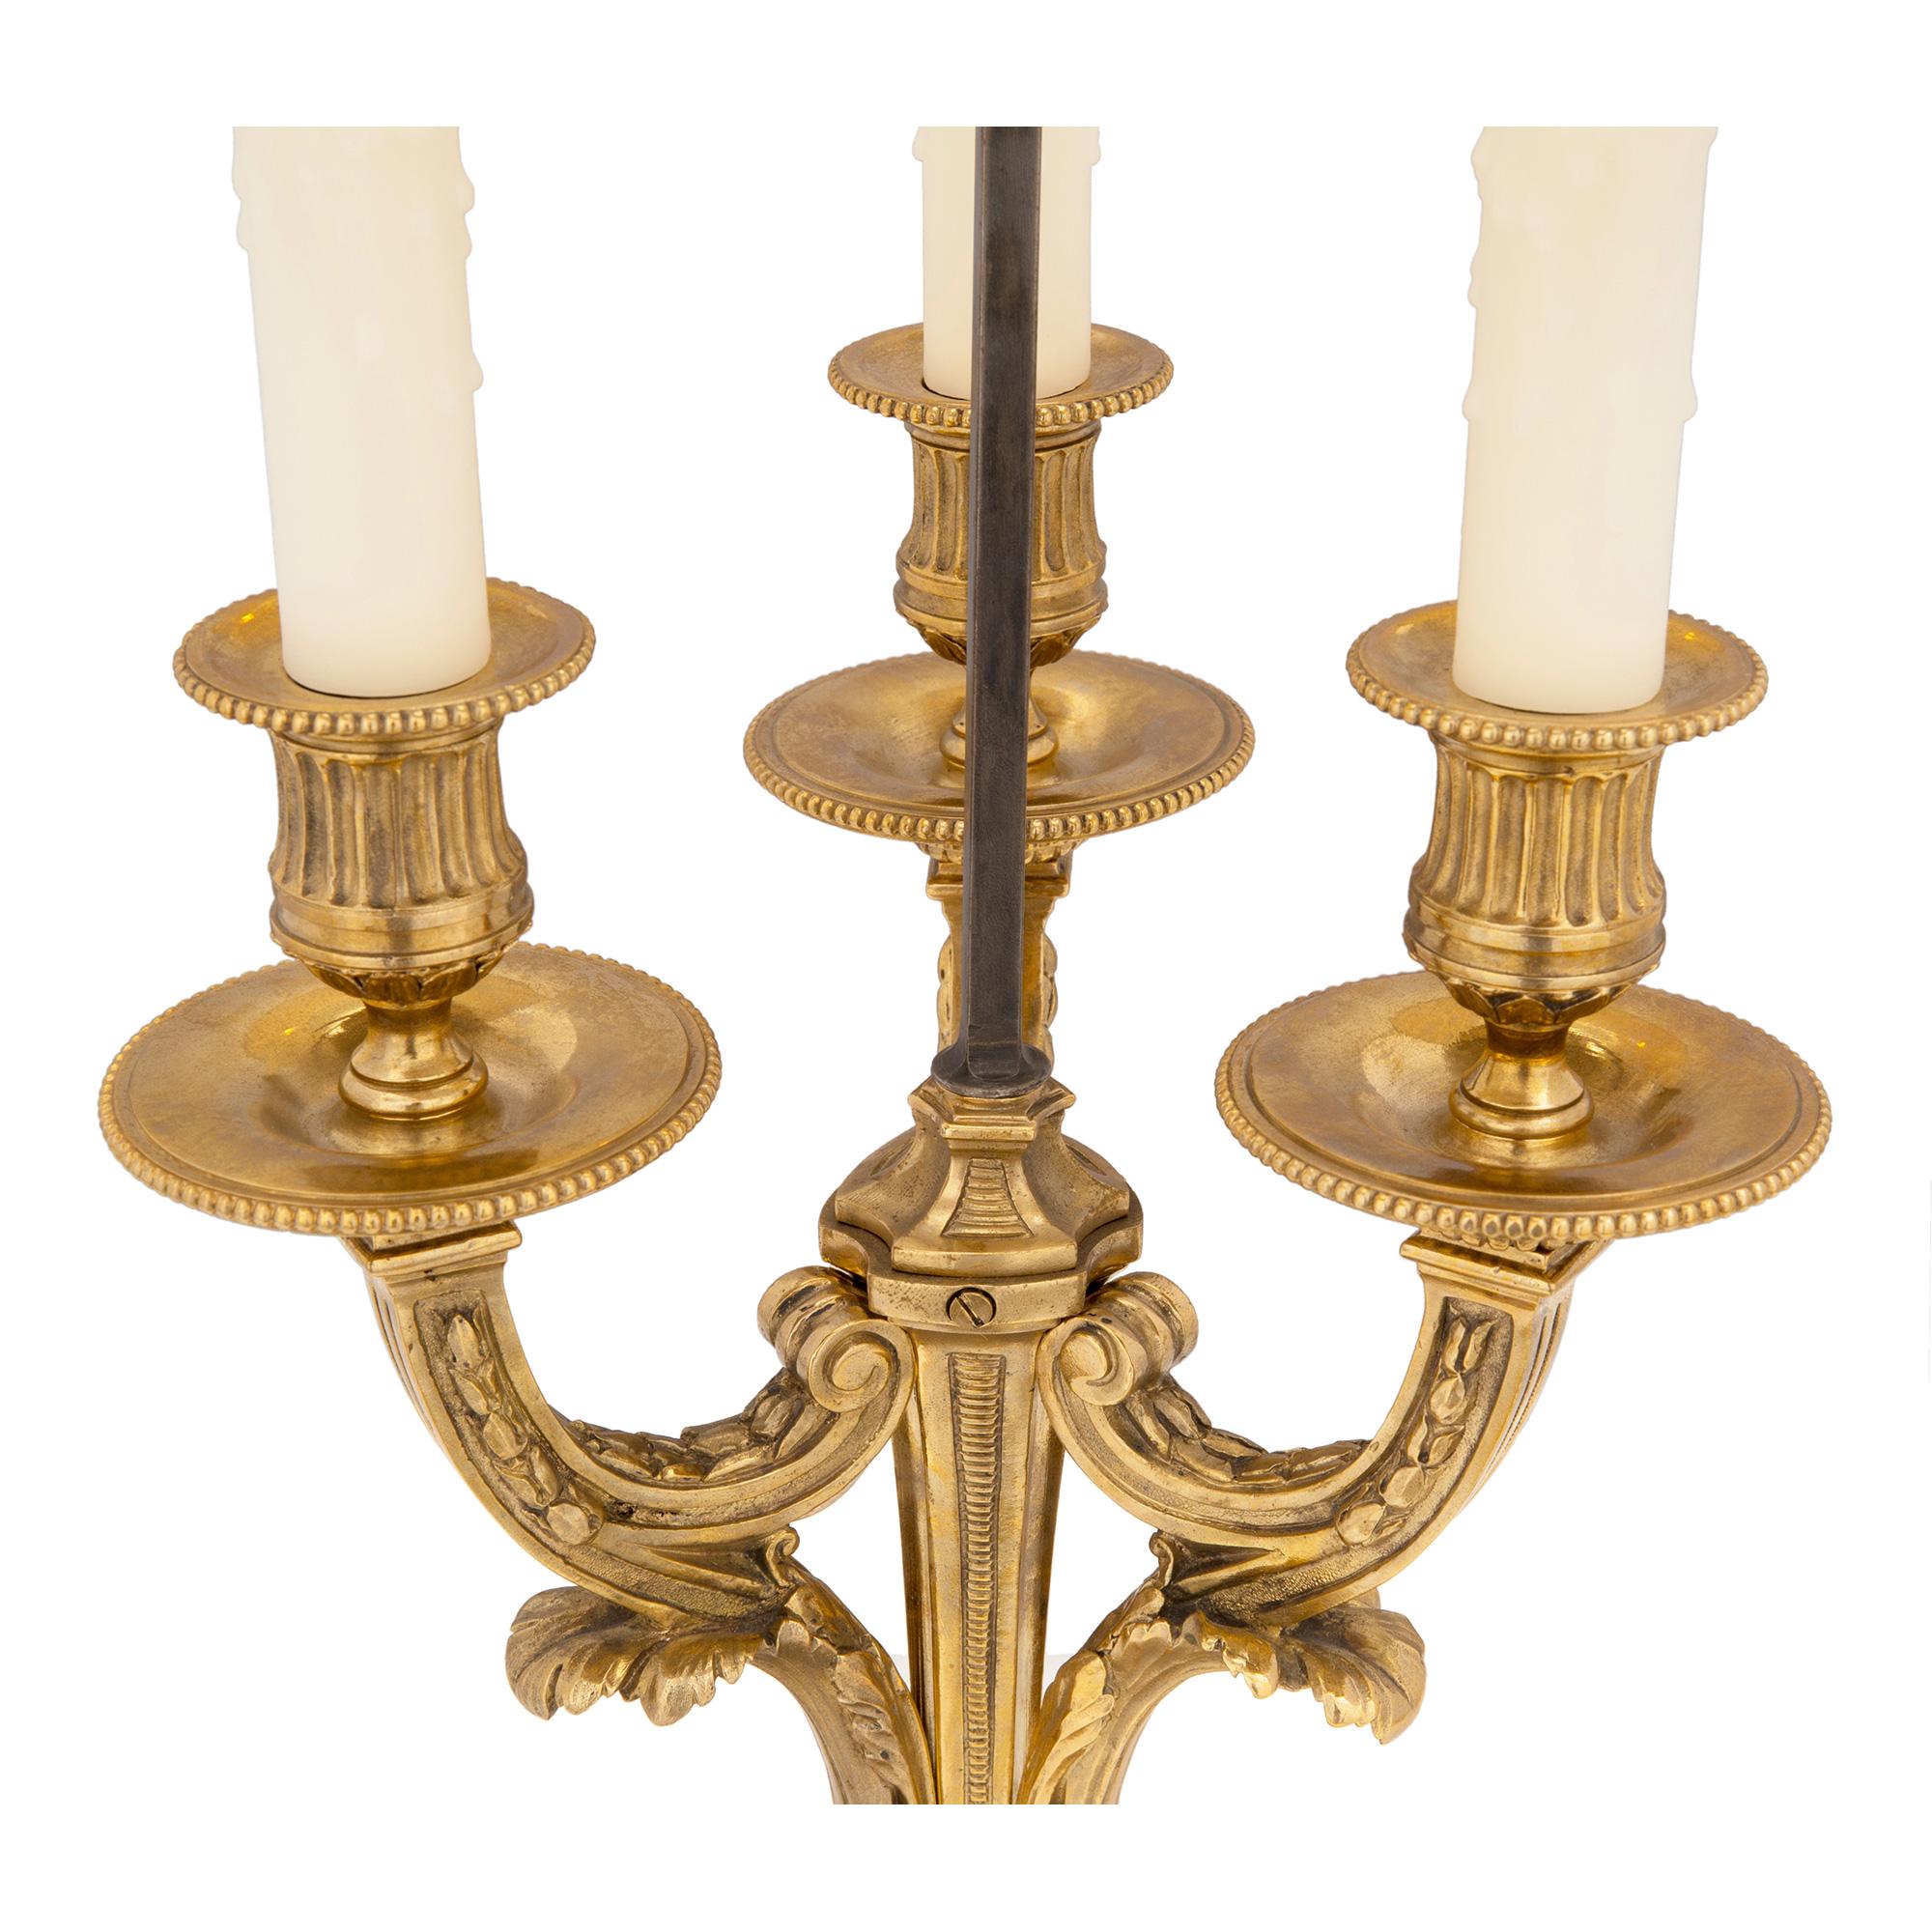 Pair of French Mid-19th Century Louis XVI Style Ormolu Bouilotte Lamps For Sale 1